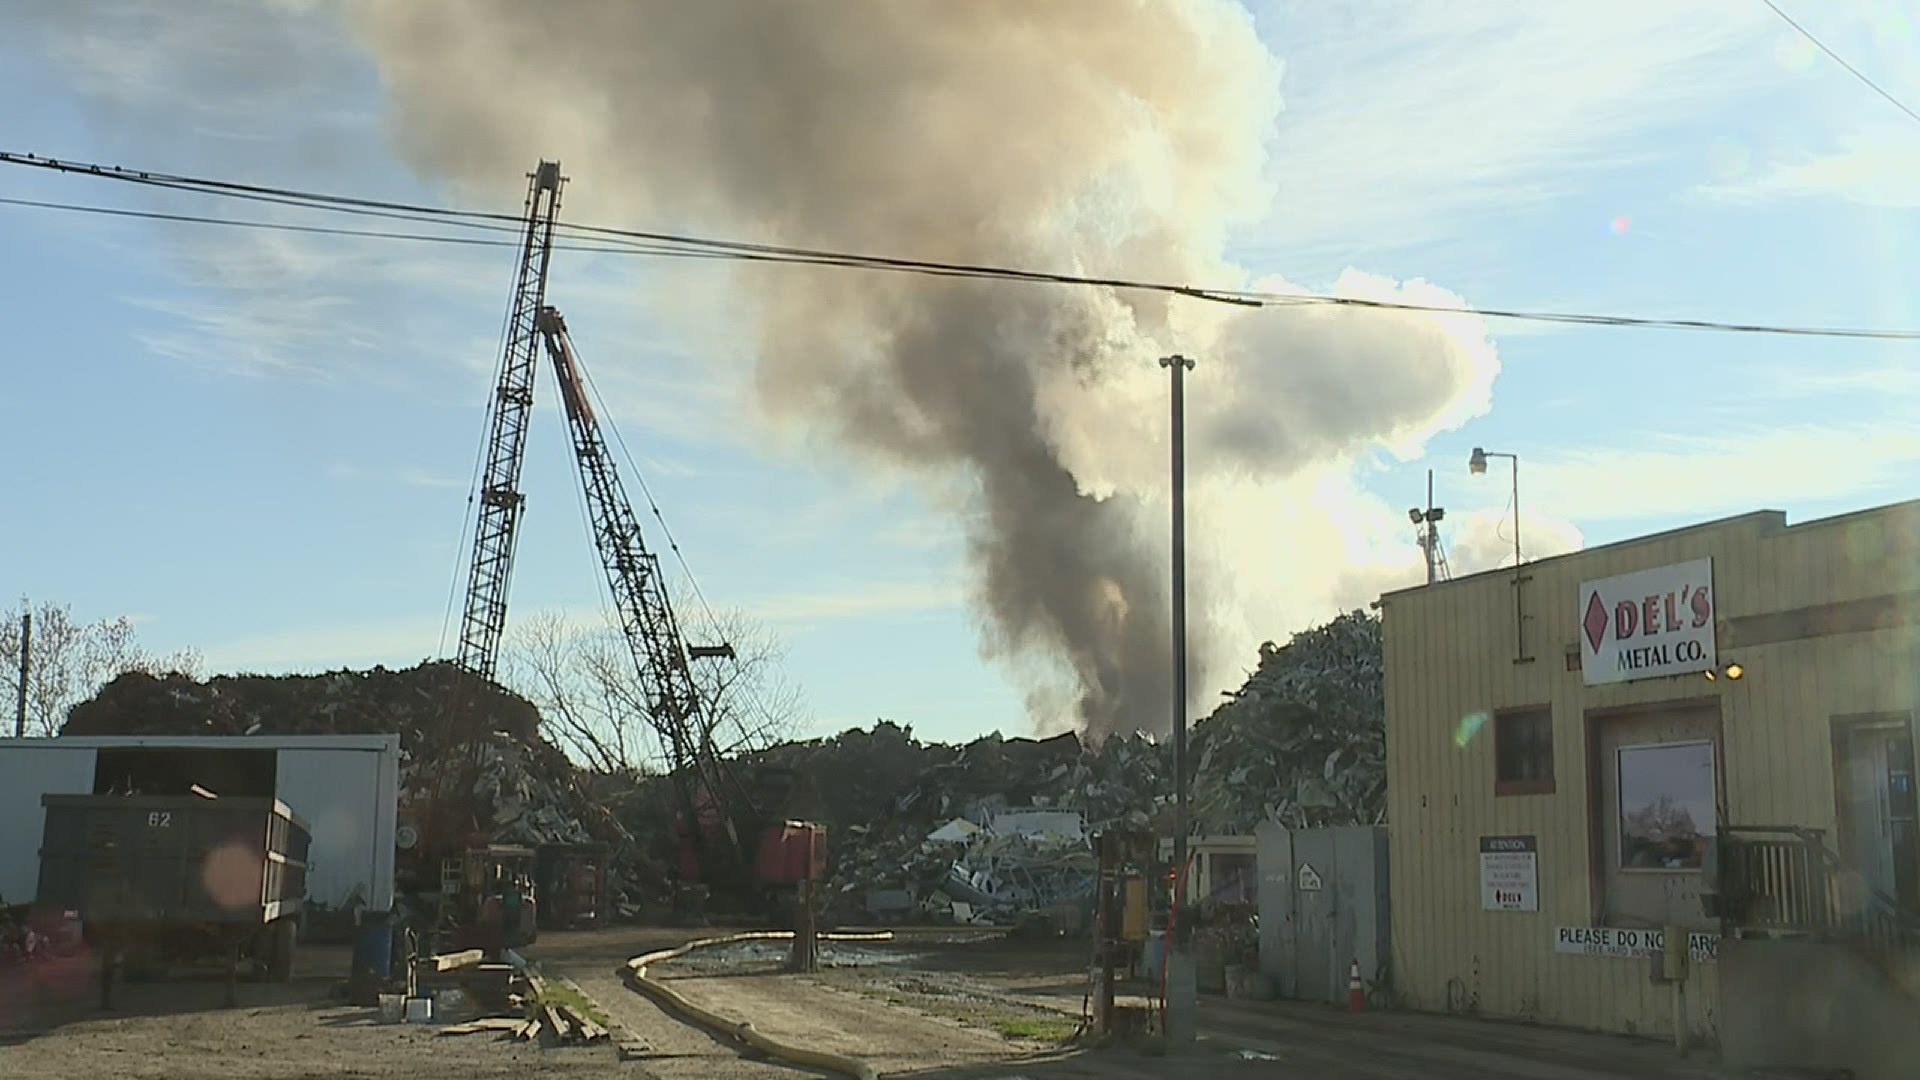 The fire was contained to just the scrap metal and did not impact any surrounding businesses.